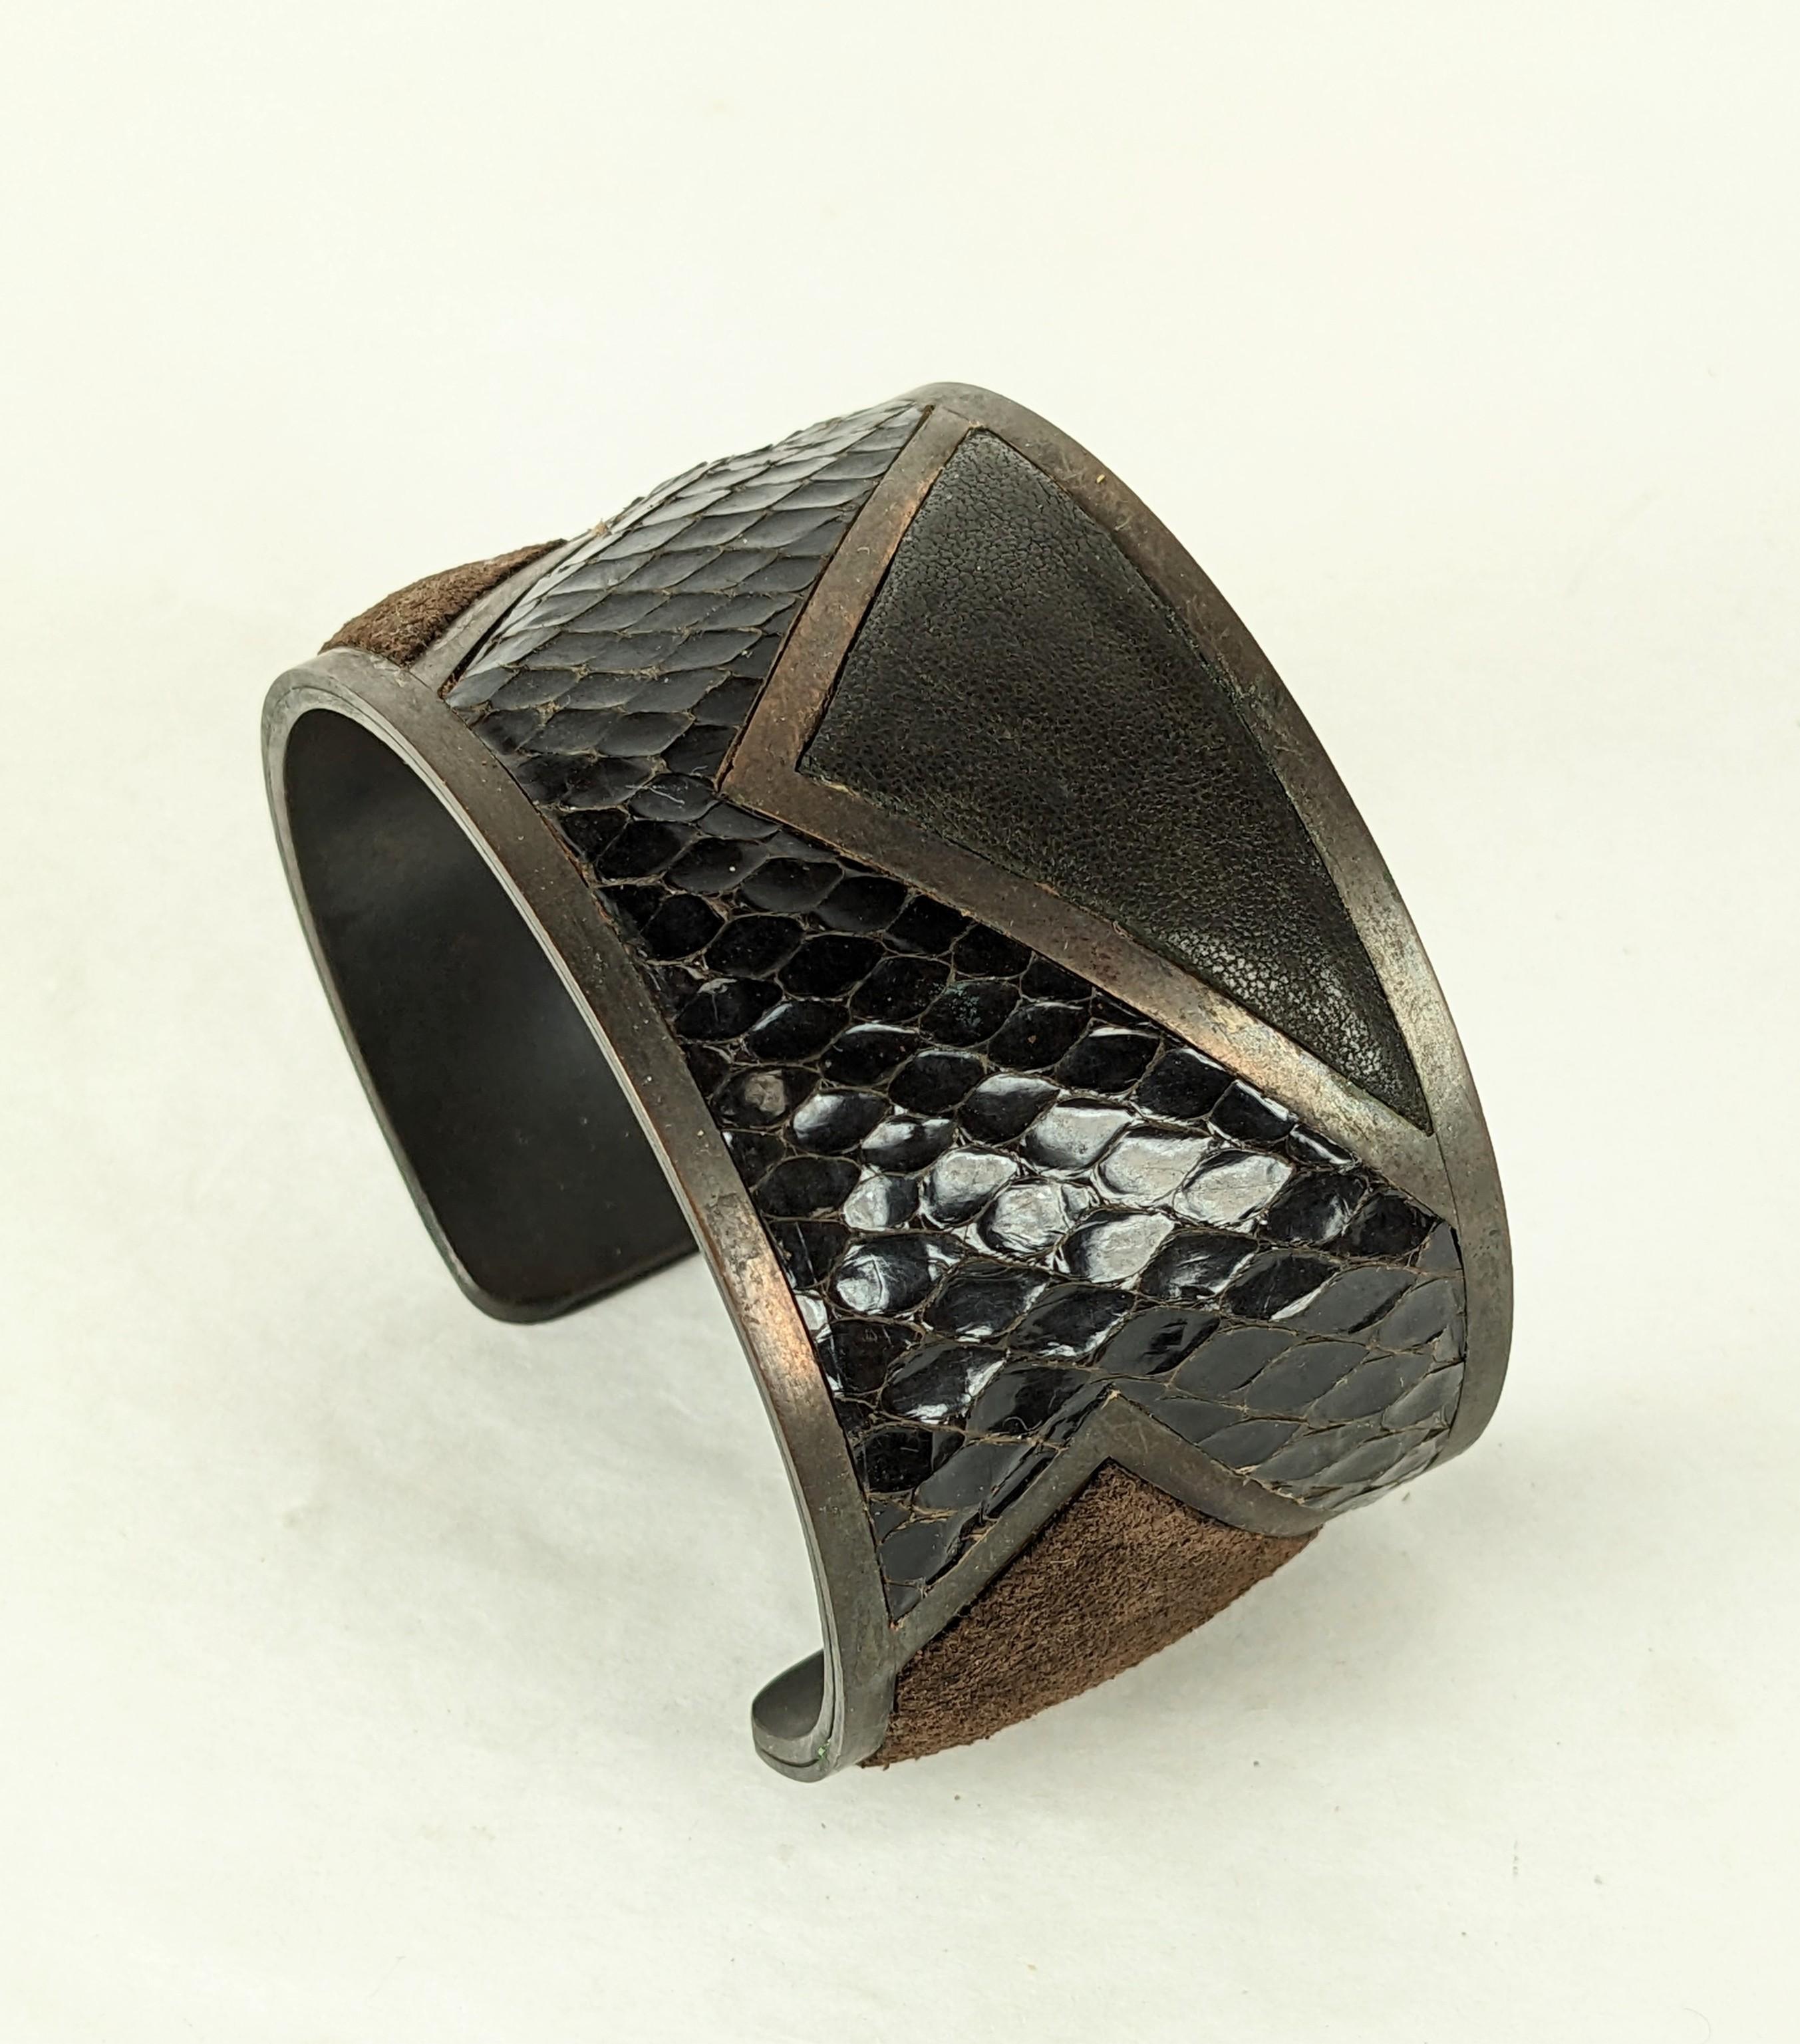 Artisan Yves Saint Laurent Haute Couture Bronze and Exotic Skin Cuff, 1980 For Sale